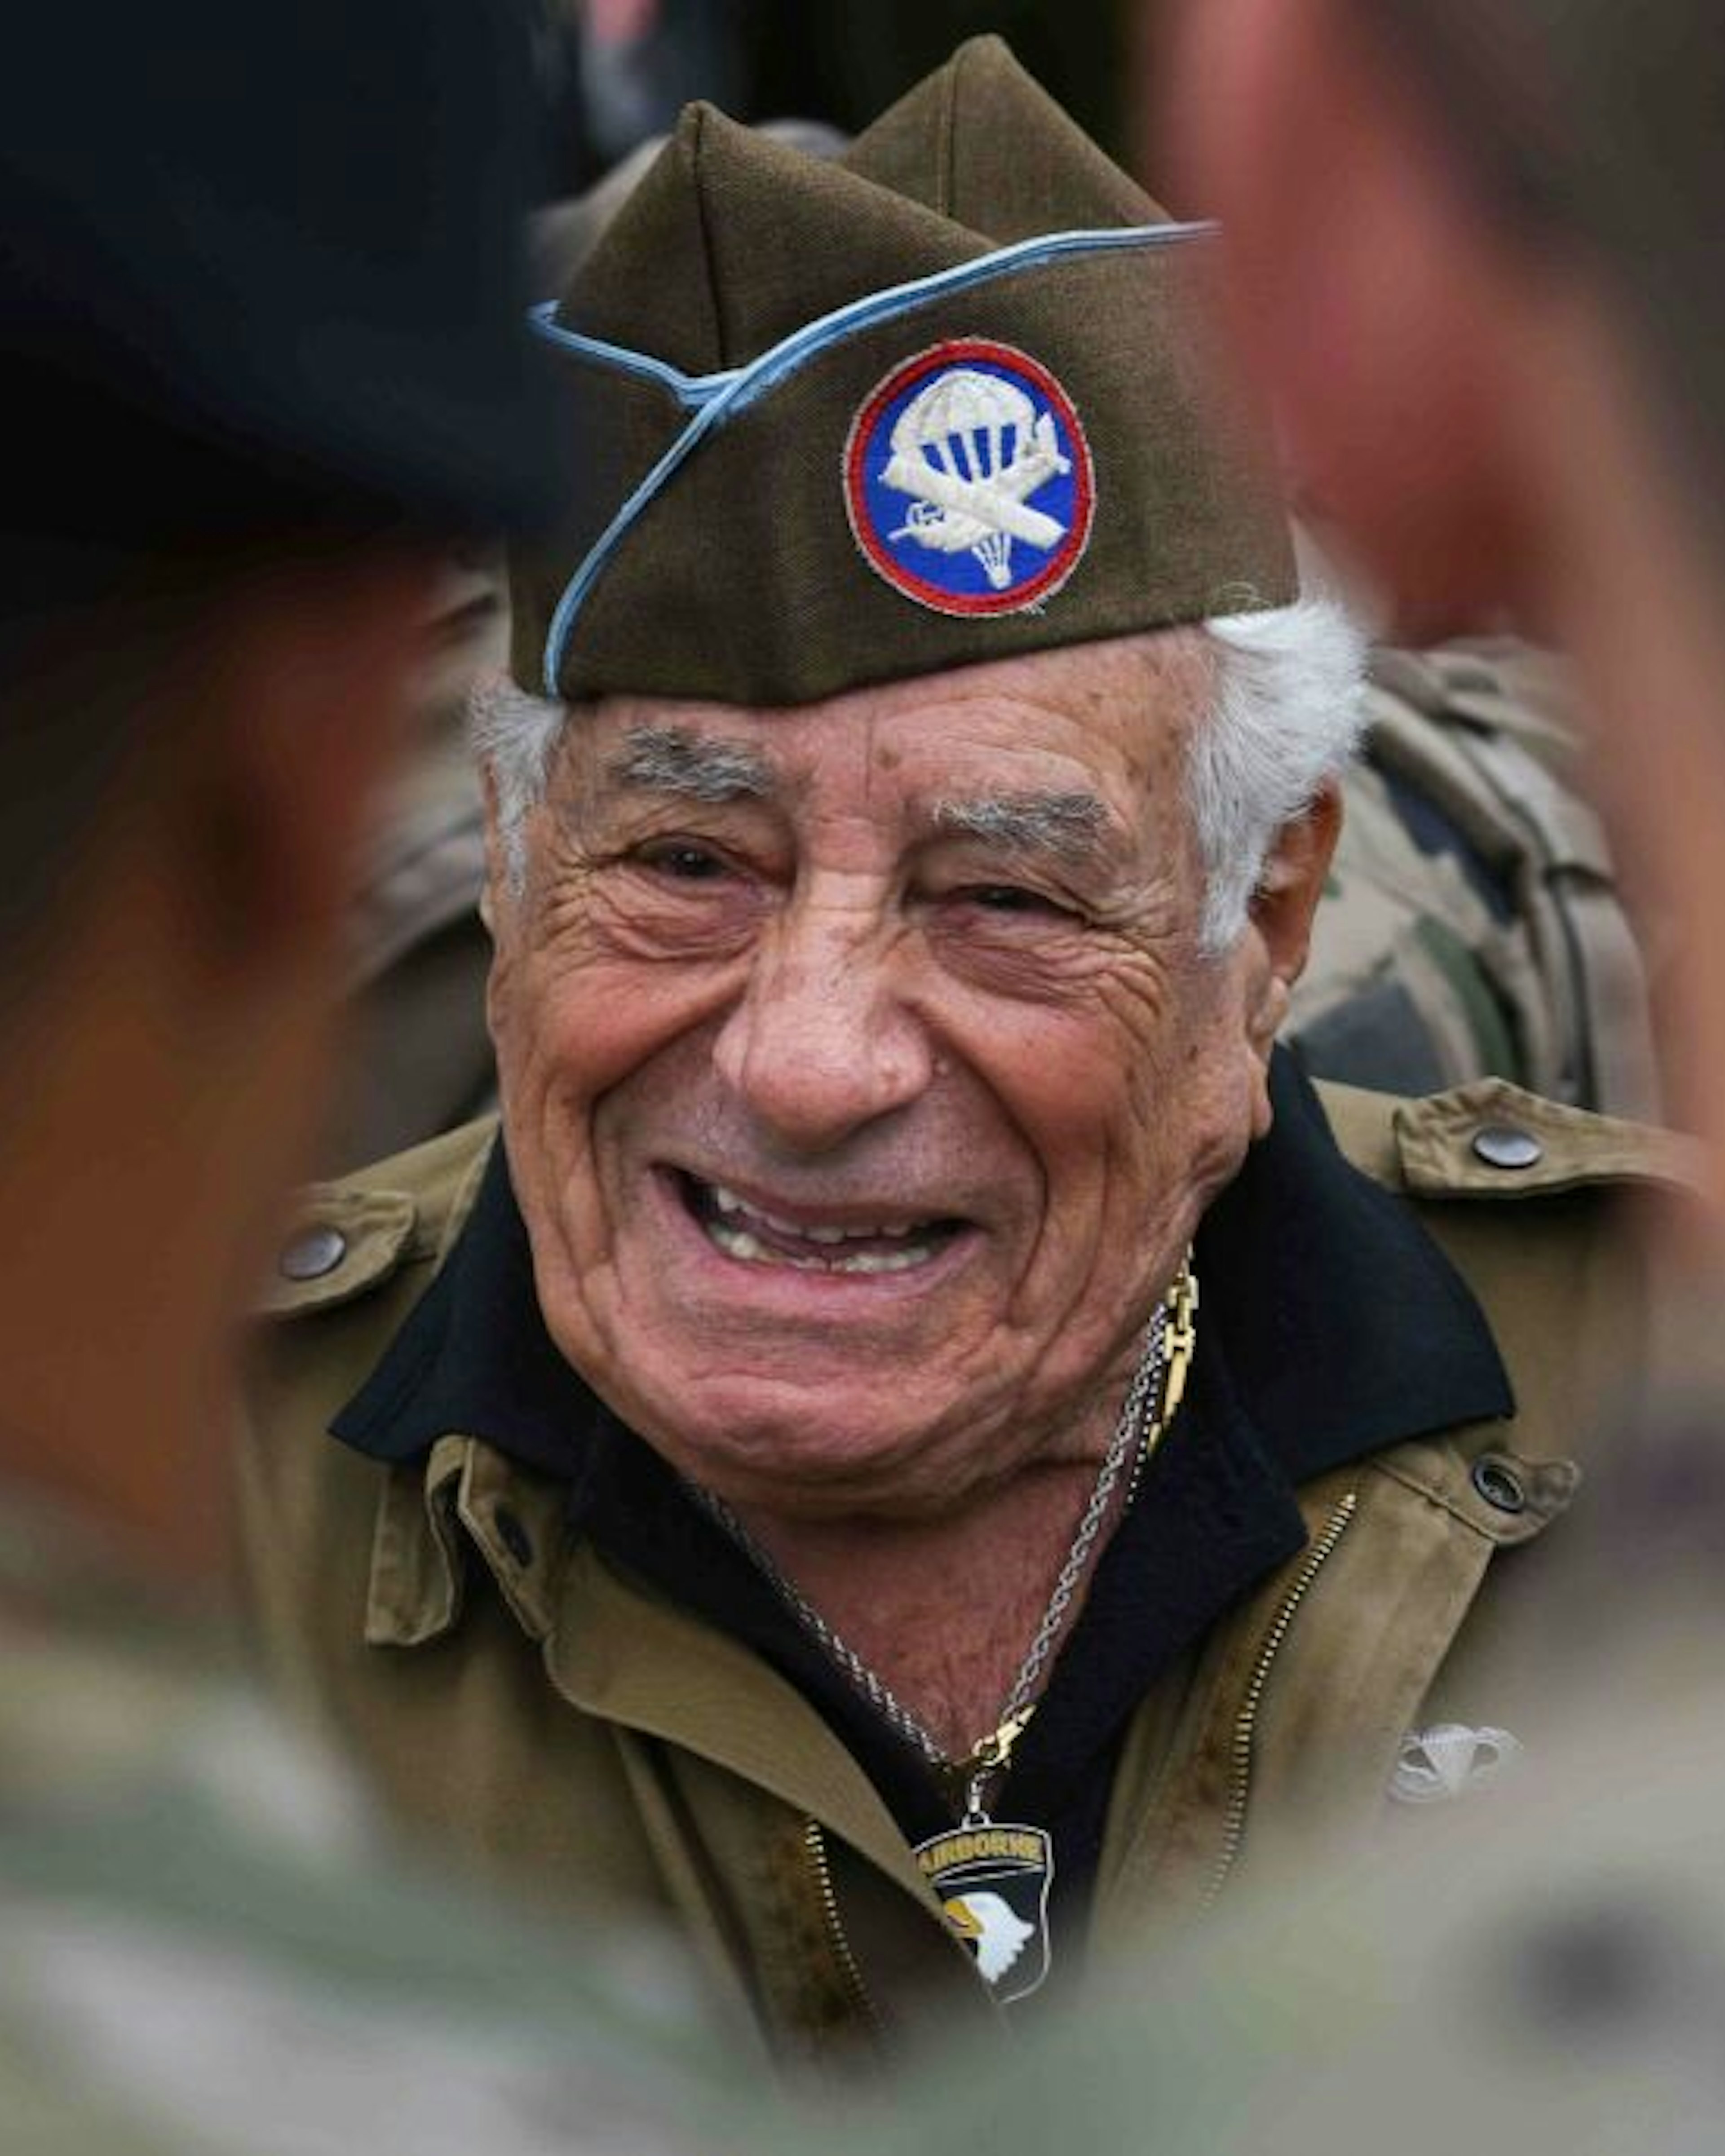 Celebrations for the 75th Anniversary of the Normandy Landings: American soldiers of the 101st Airborne Division parachuted into the Carentan Marsh on June 5, 2019, under the watchful eye of Tom Rice (97 years old) and a few other veterans, including here Vincent Speranza. (Photo by: Desfoux/Andia/Universal Images Group via Getty Images)